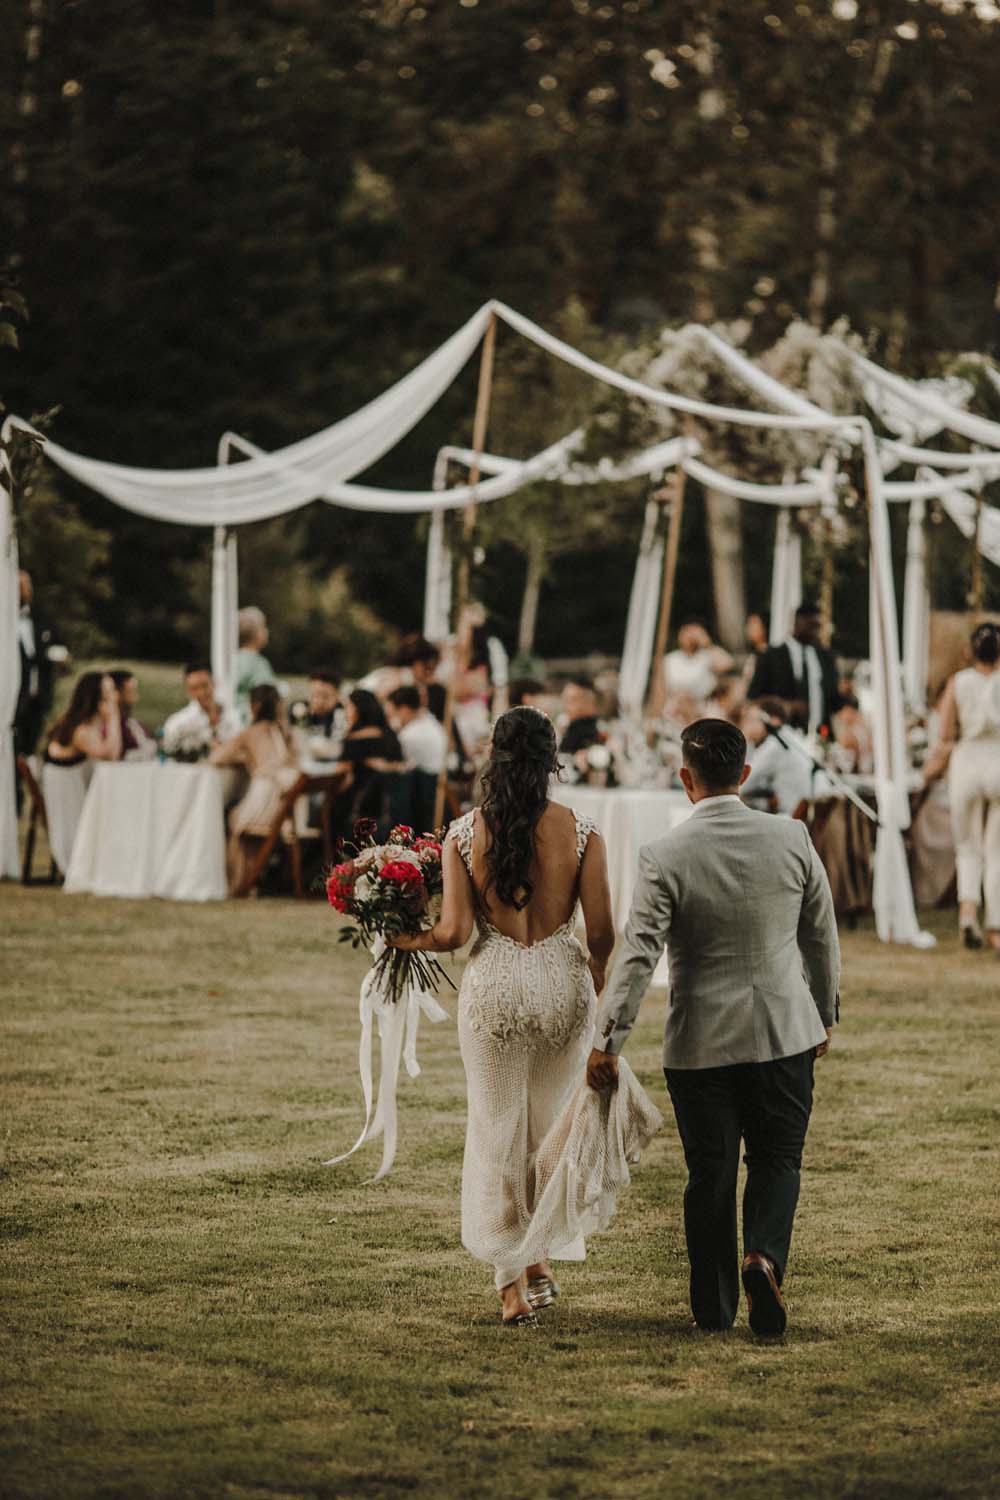 A Romantic and Ethereal Celebration in Fort Langley, BC - couple